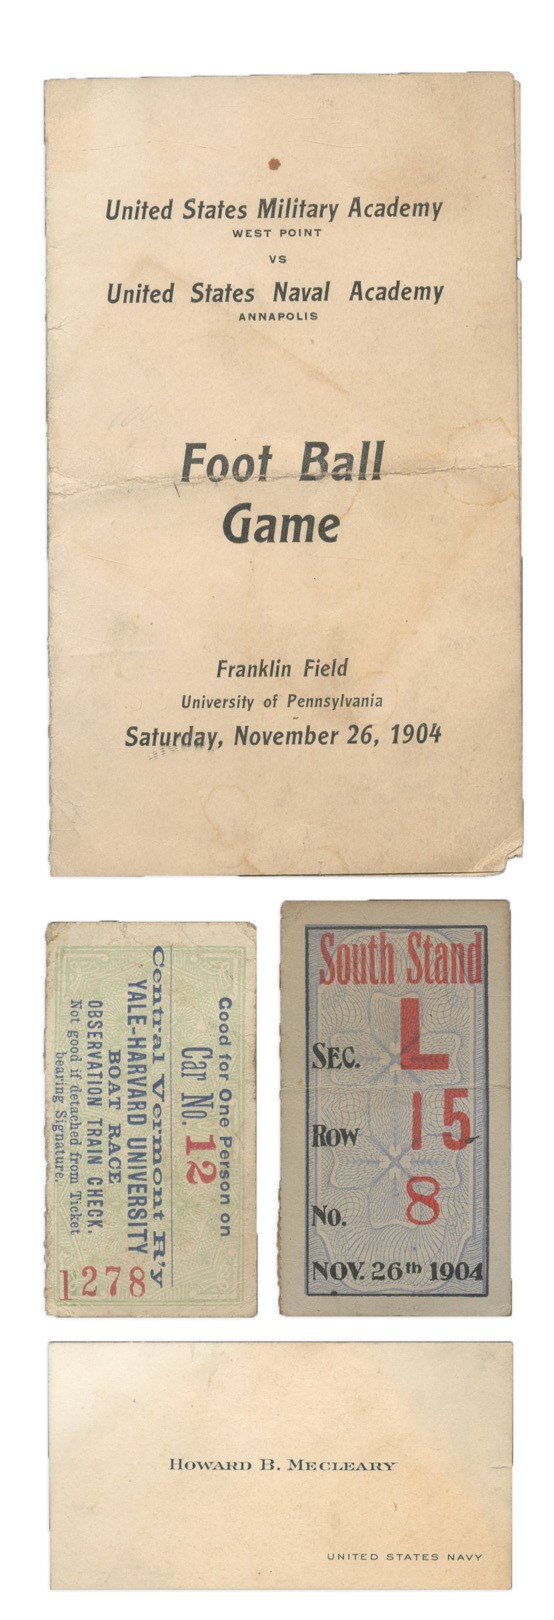 The Ivy League And Collegiate Program Archive - 1904 Army vs. Navy Foot Ball Game Program and Ticket